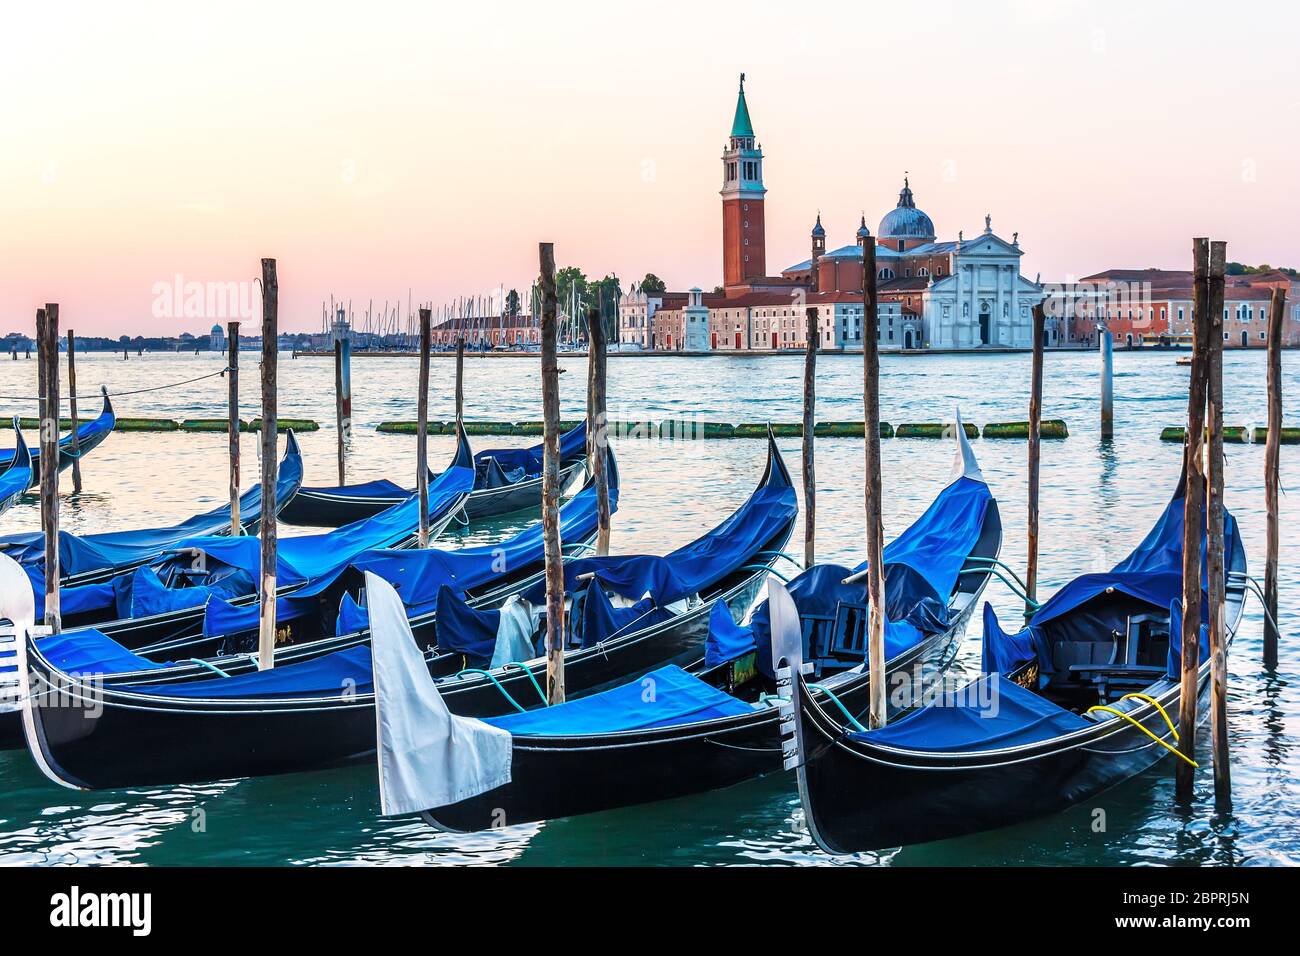 Gondolas in Venice, view of the Grand Canal. Stock Photo